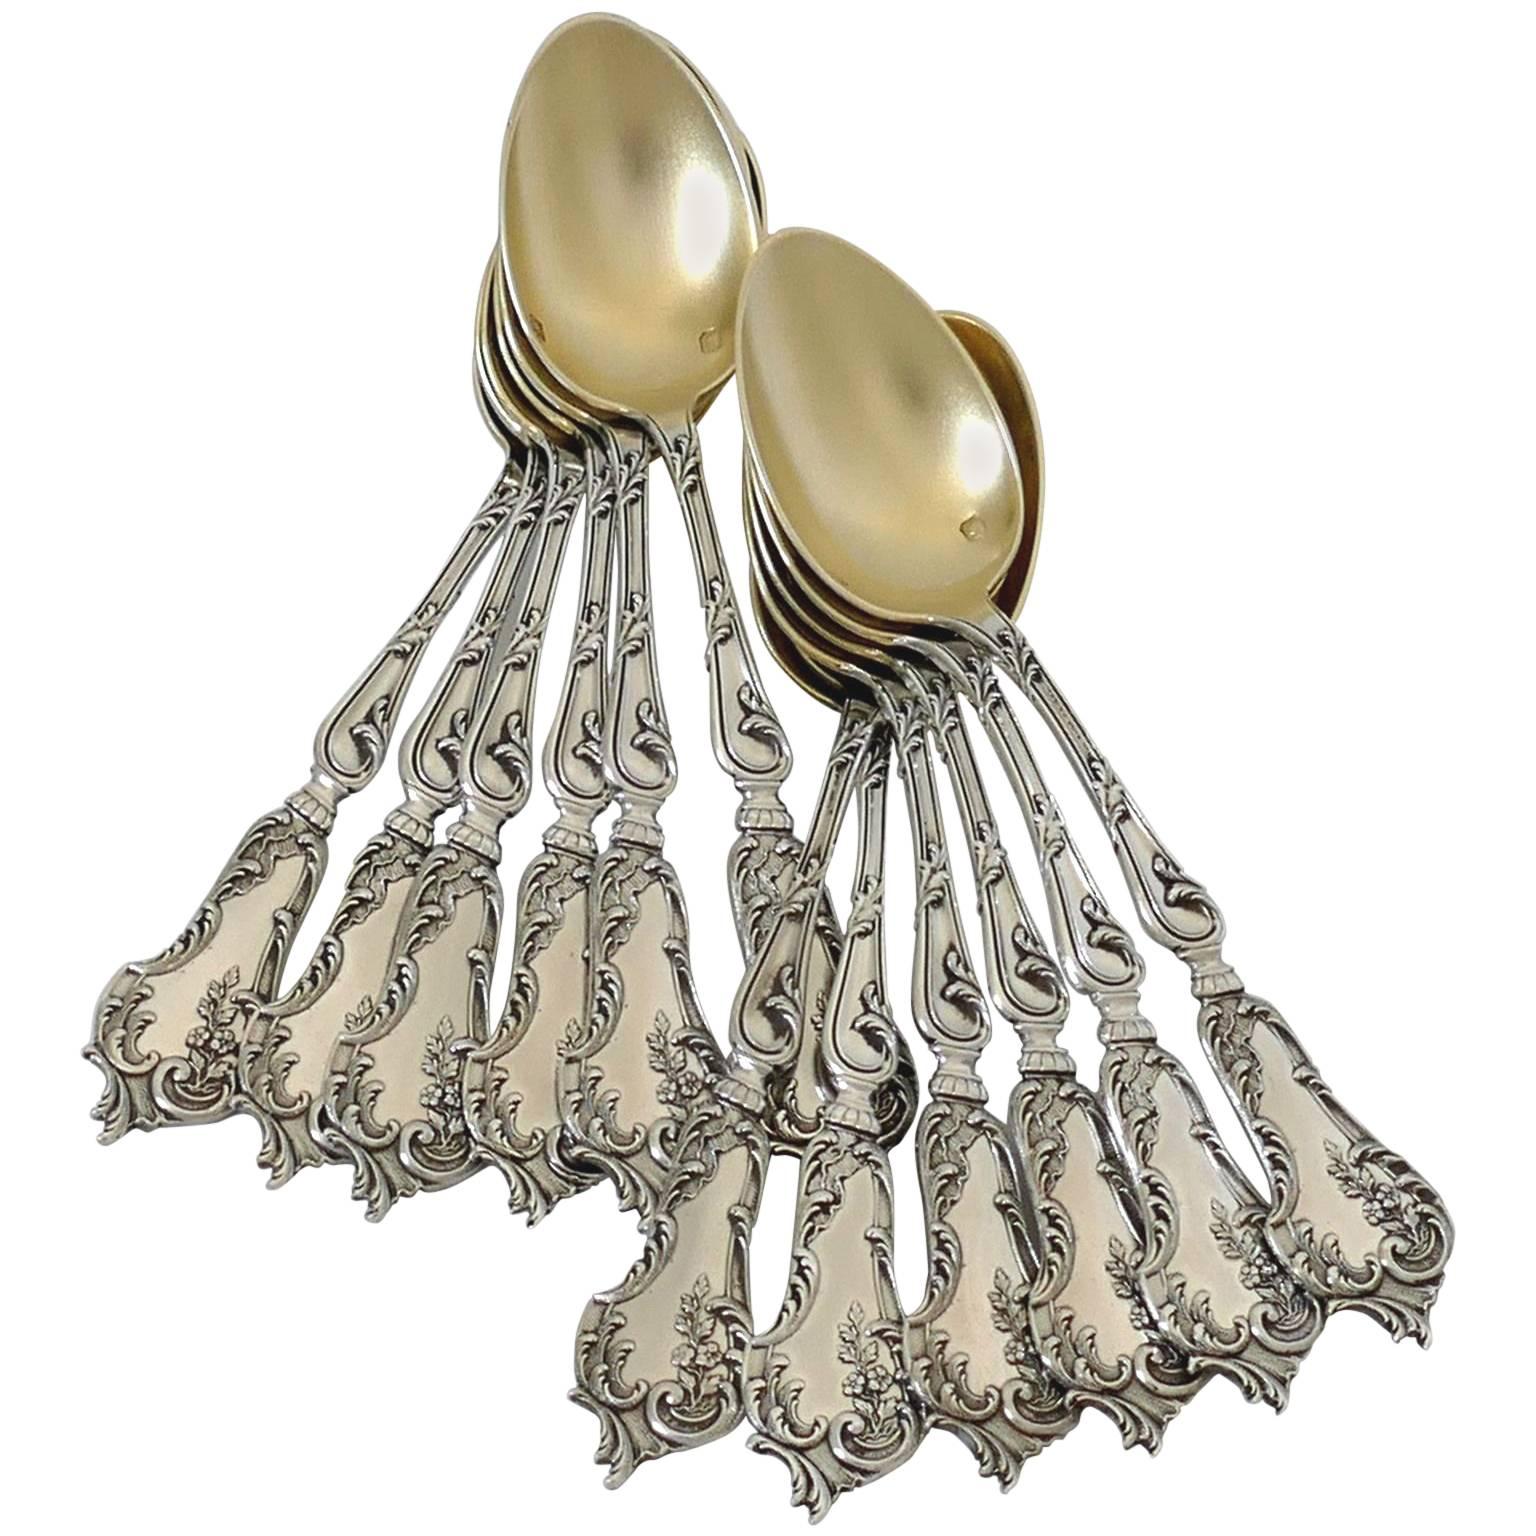 Soufflot Fabulous French All Sterling Silver 18-Karat Gold Tea Coffee Spoons Set For Sale